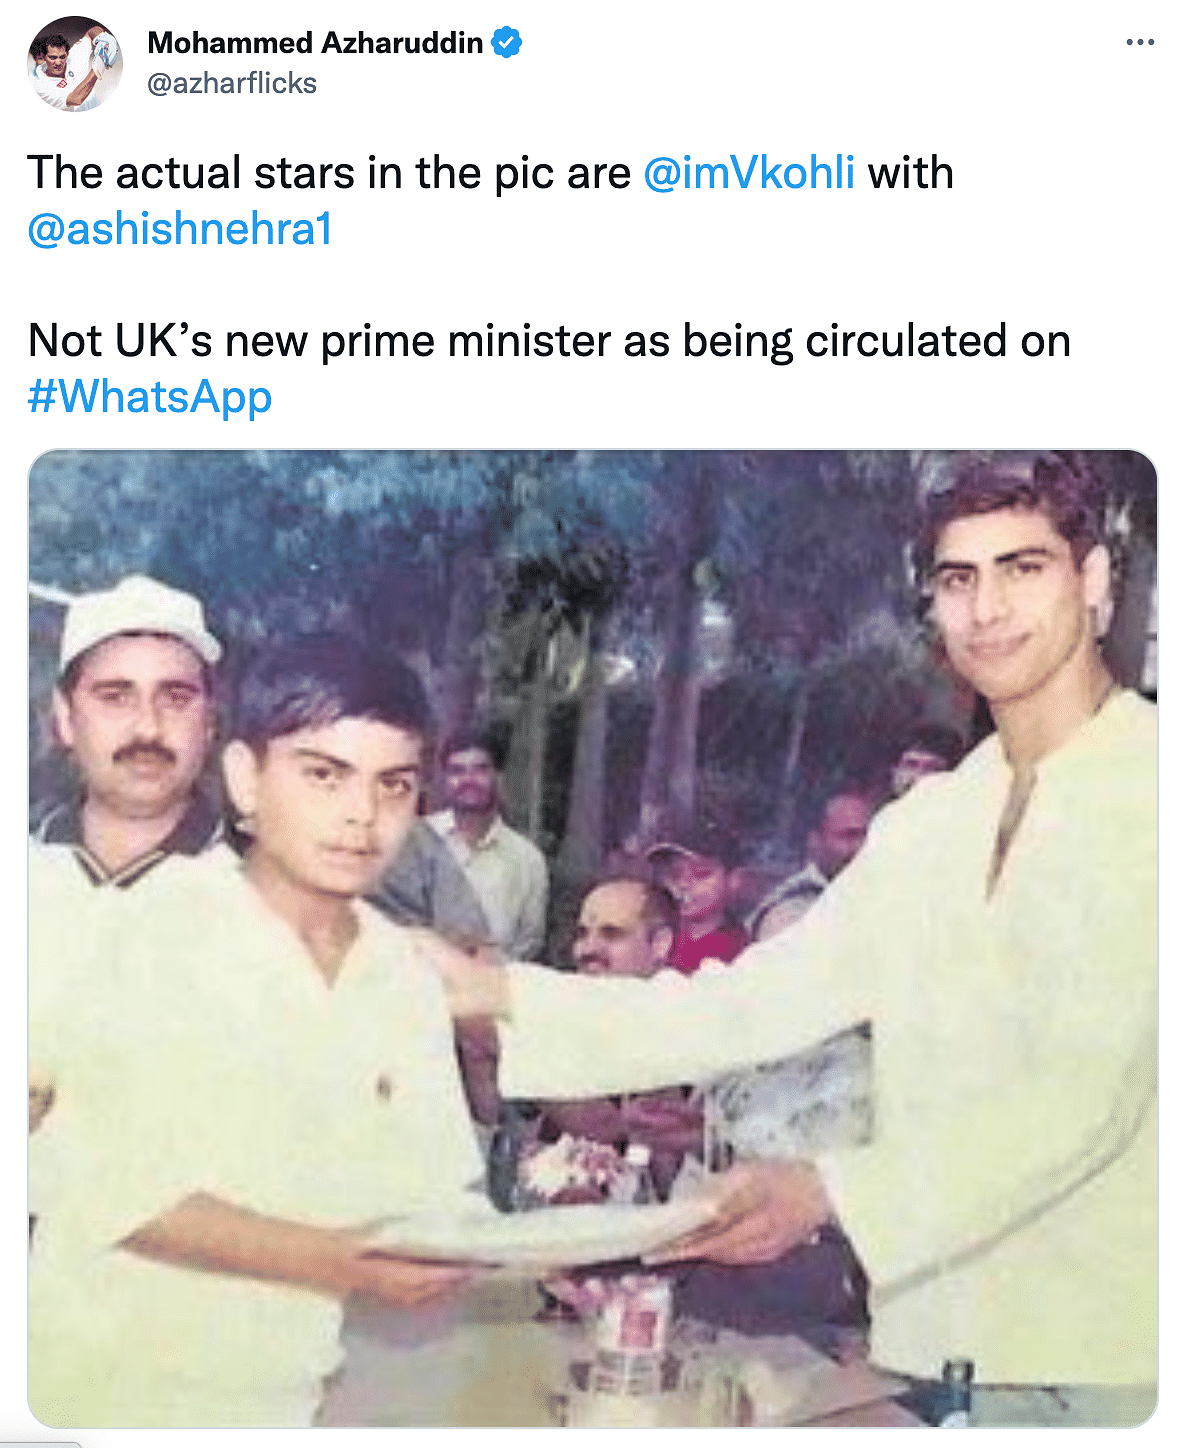 The picture is from 2003, which shows young Virat Kohli receiving an award from Ashish Nehra.